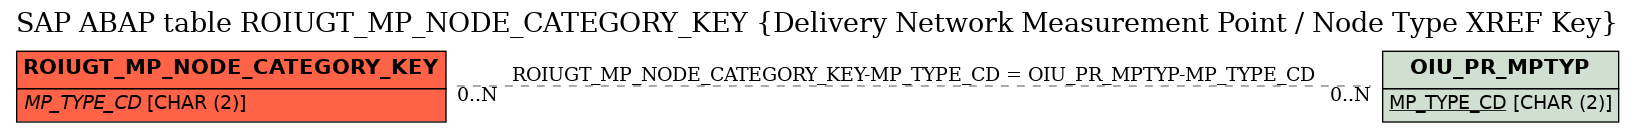 E-R Diagram for table ROIUGT_MP_NODE_CATEGORY_KEY (Delivery Network Measurement Point / Node Type XREF Key)